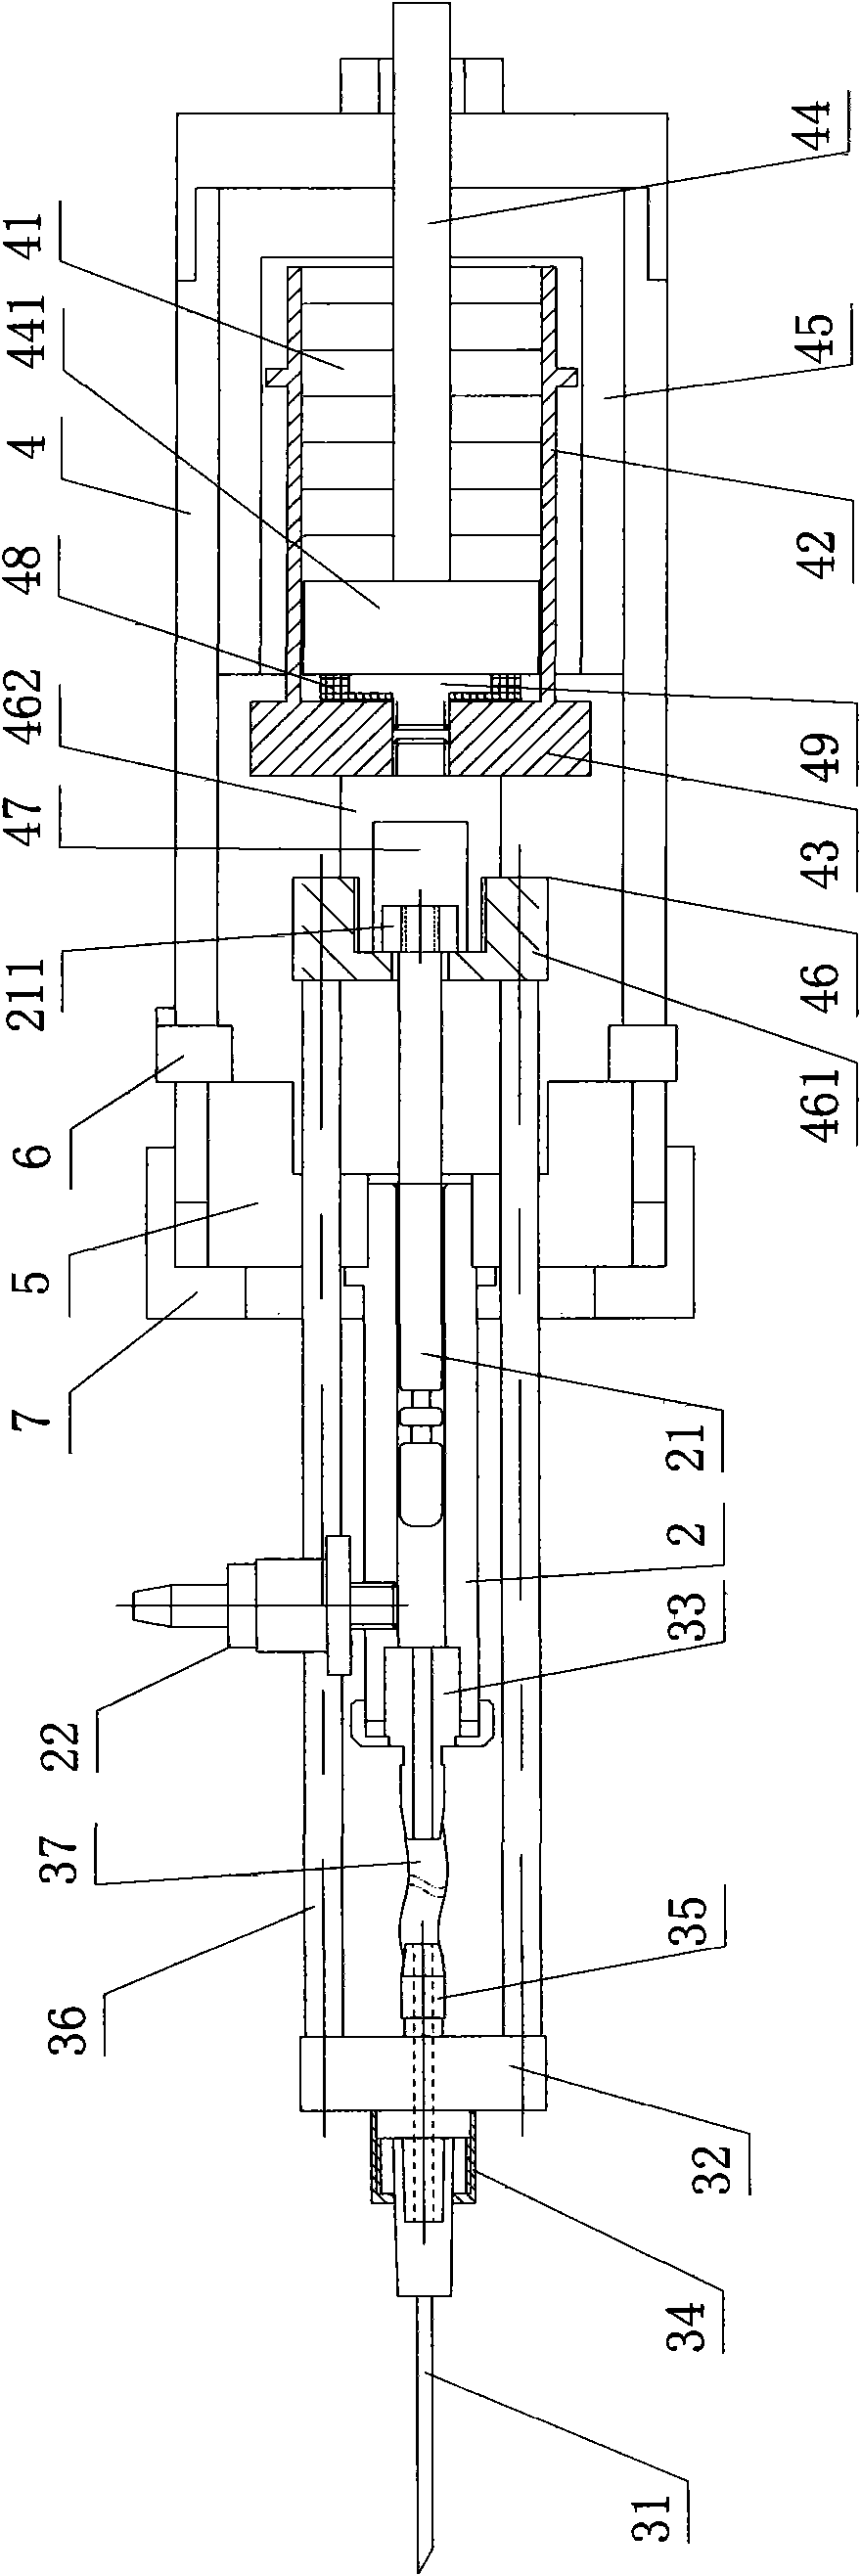 Device for automatic and continuous injection of poultry